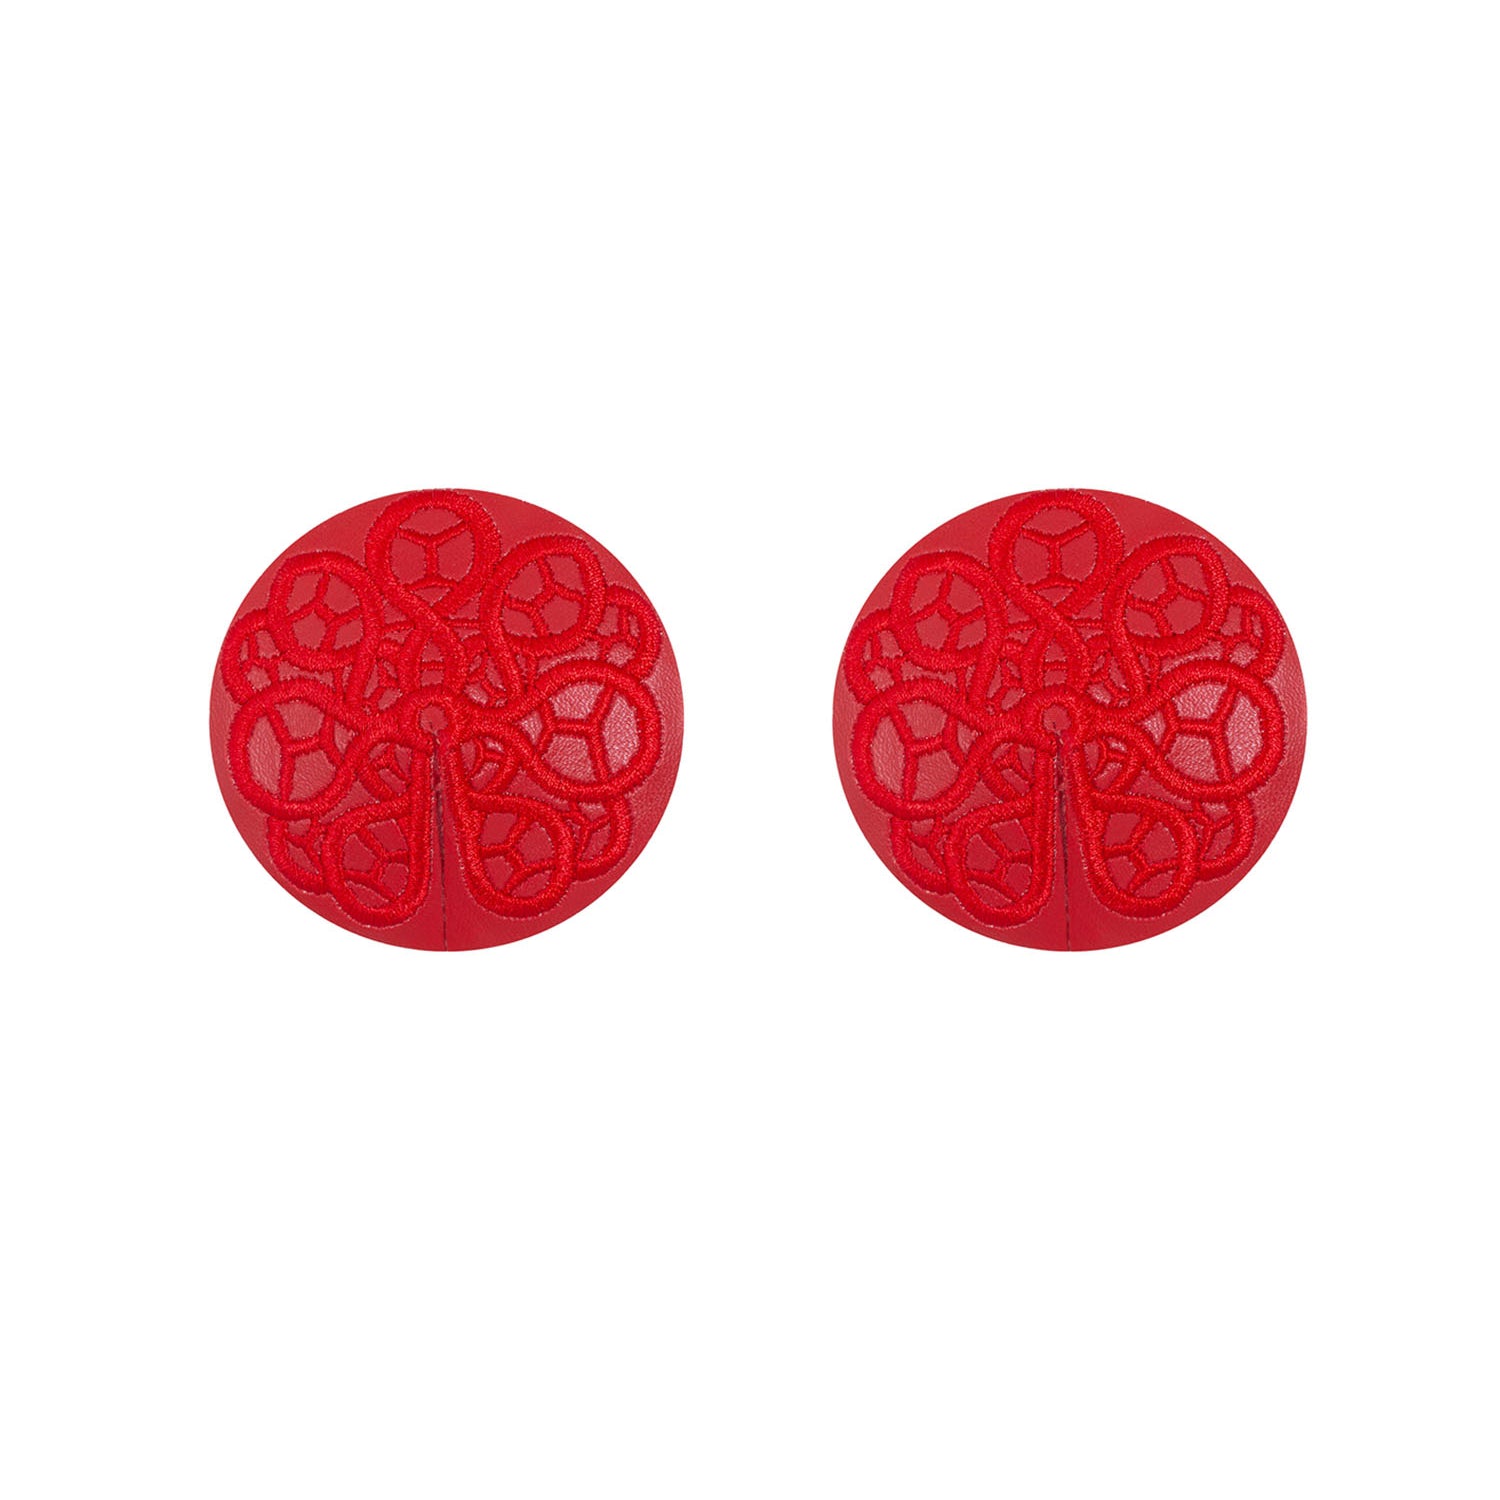 Bluebella Tallulah Nipple Pasties (Tomato Red) - Nipplets | Avec Amour Sexy Lingerie Accessories